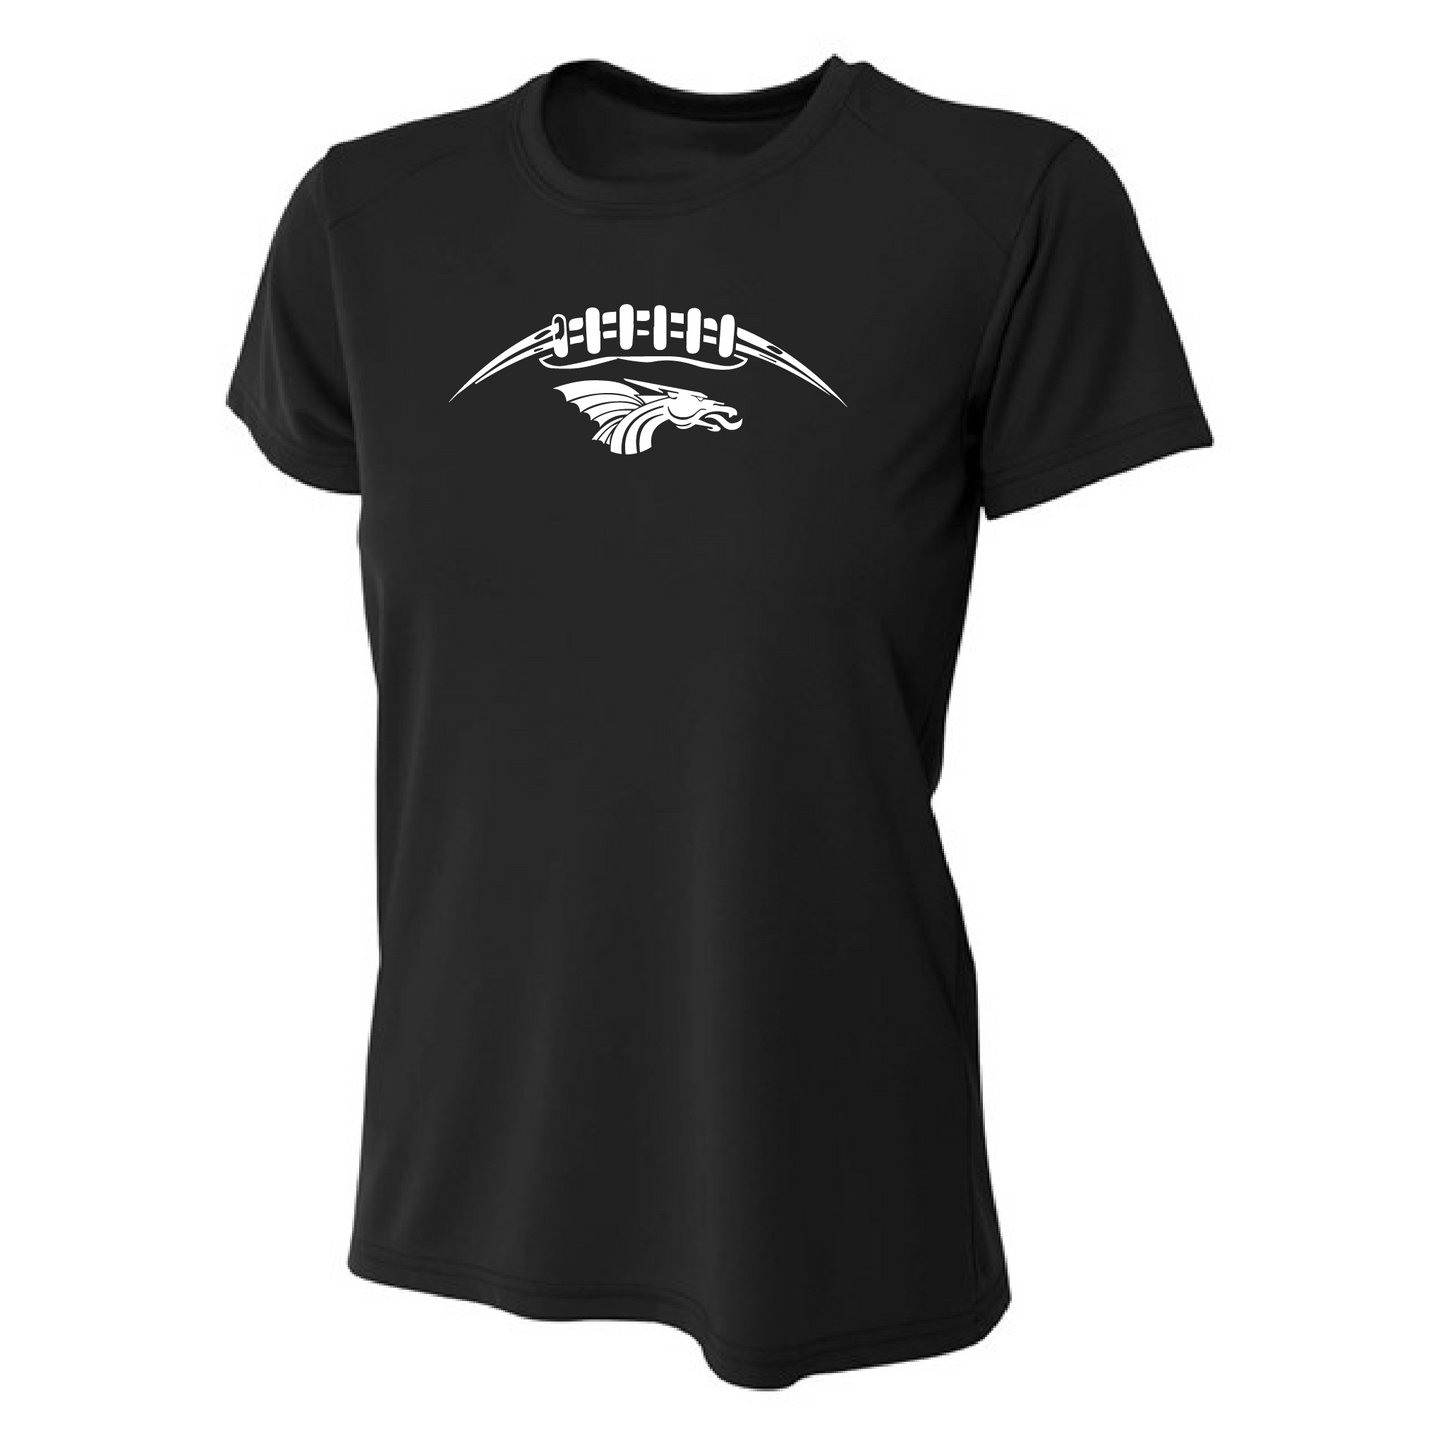 Womens S/S T-Shirt - Dragons Football Laces